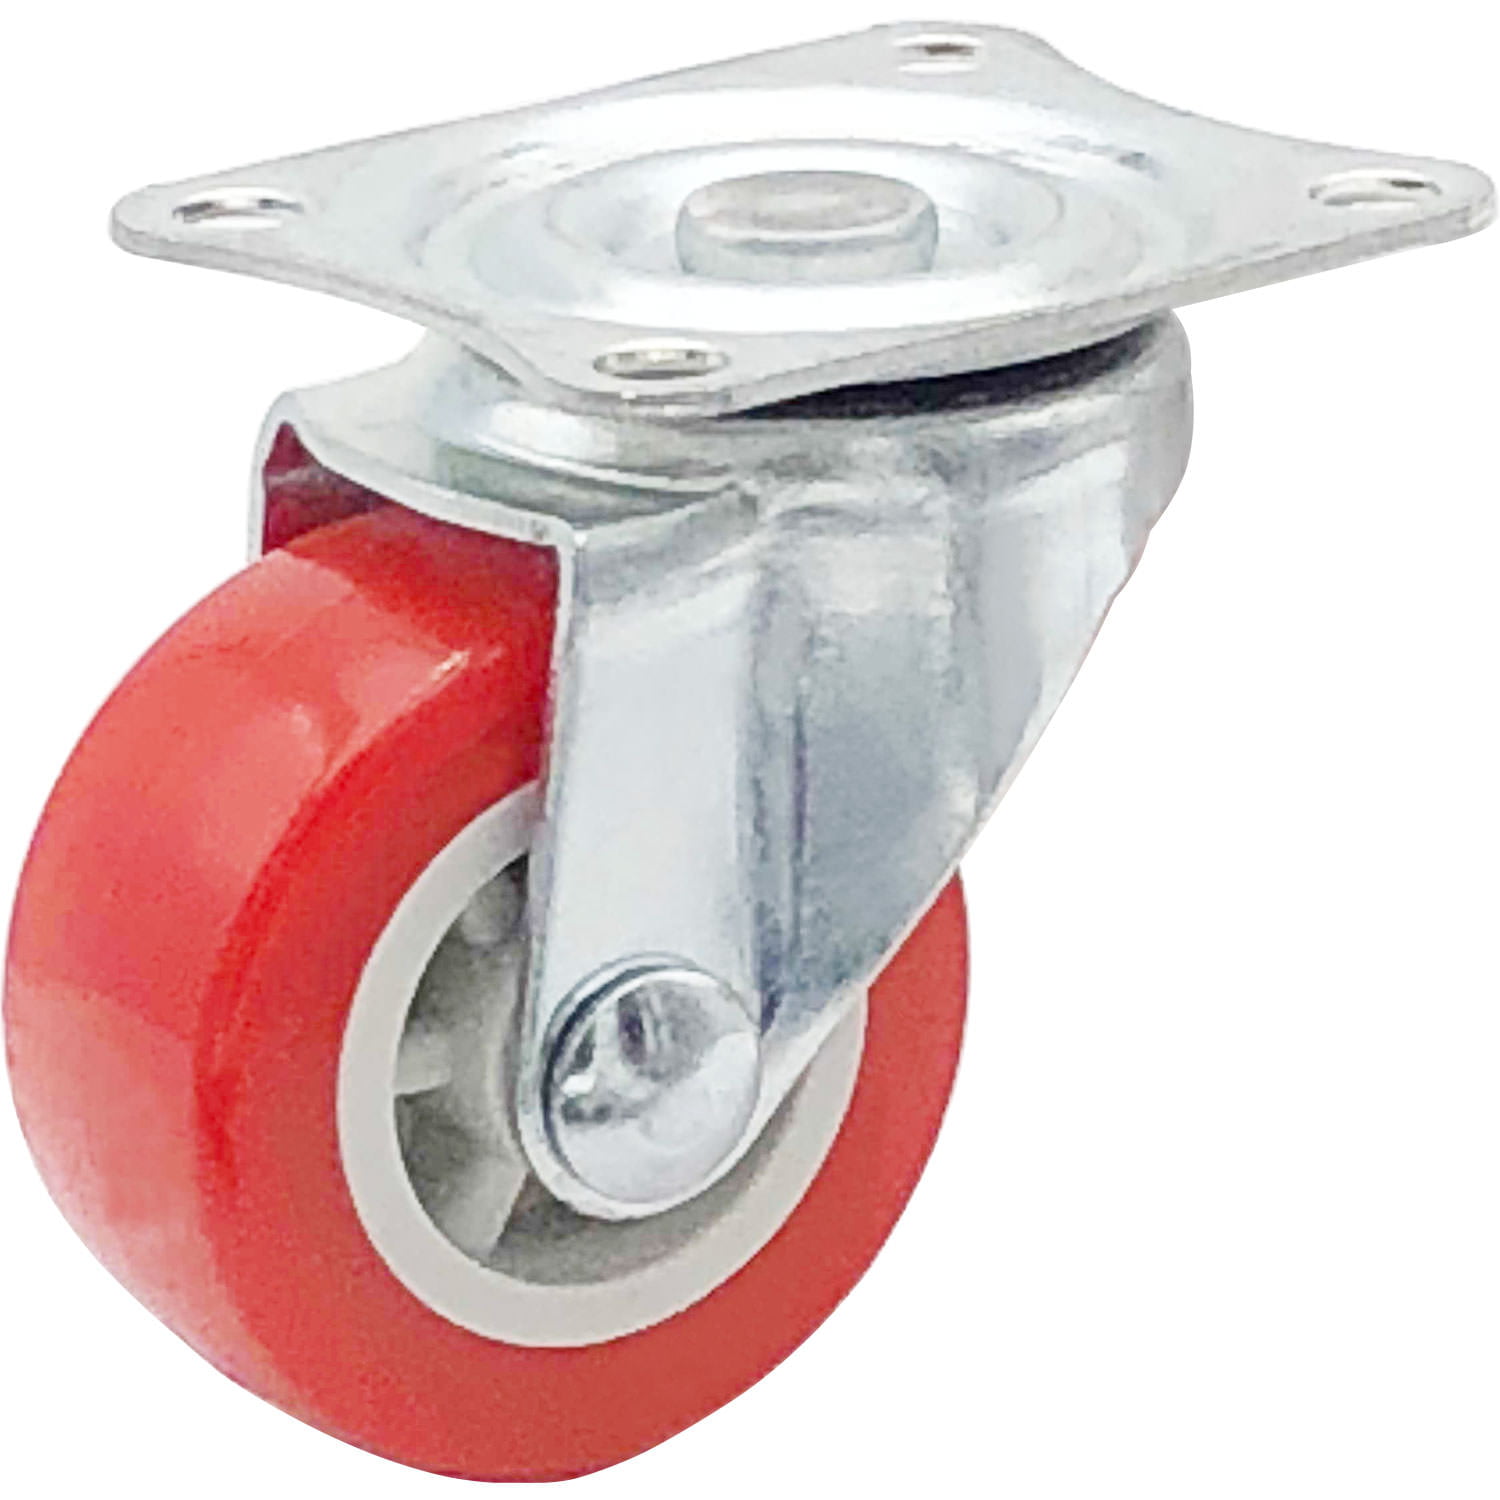 Lot of 24 1.5" Low Profile Caster Wheels Soft Rubber Swivel Caster RED 